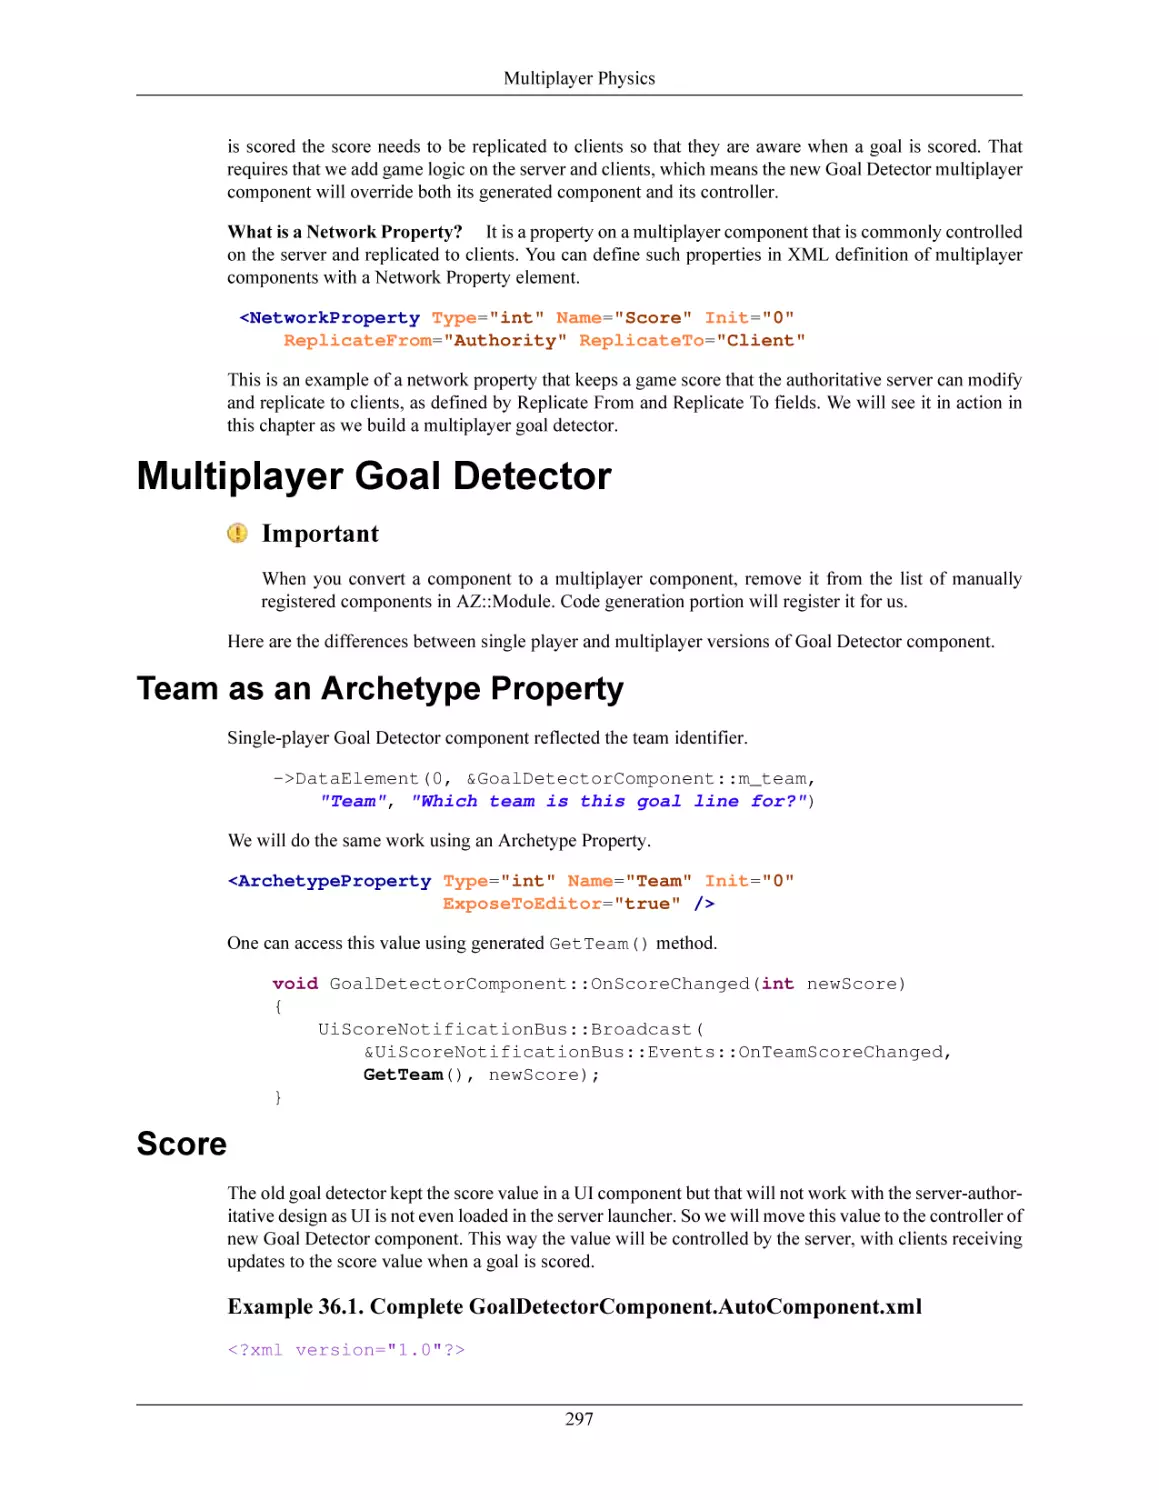 Multiplayer Goal Detector
Team as an Archetype Property
Score